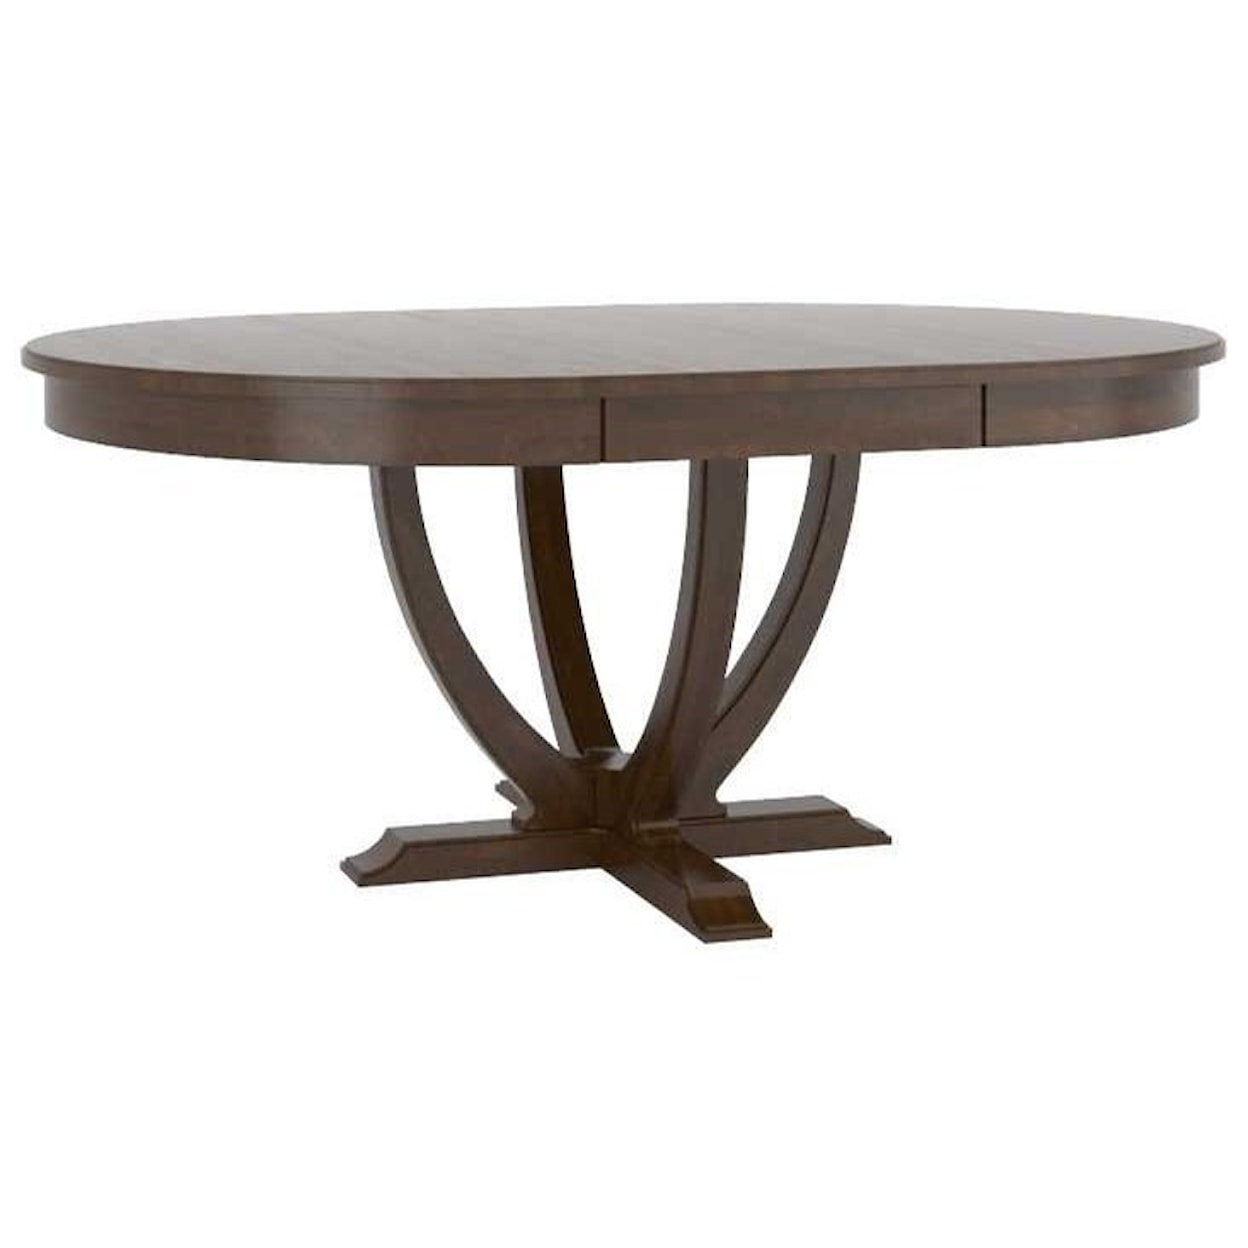 Canadel Classic. Customizable Oval Dining Table